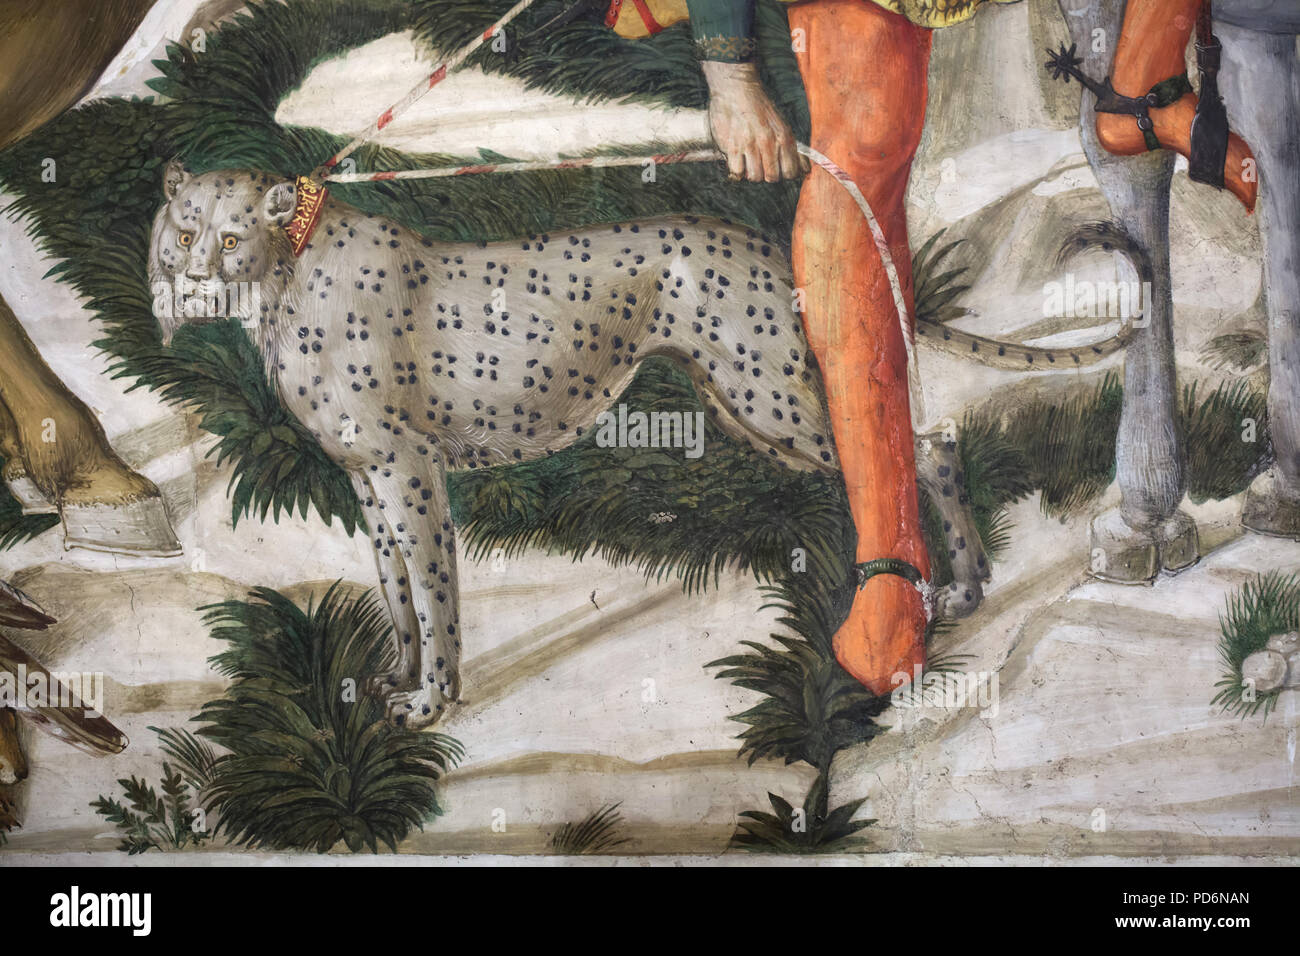 Tame cheetah depicted in the mural by Italian Renaissance painter Benozzo Gozzoli in the Magi Chapel in the Palazzo Medici Riccardi in Florence, Tuscany, Italy. Stock Photo